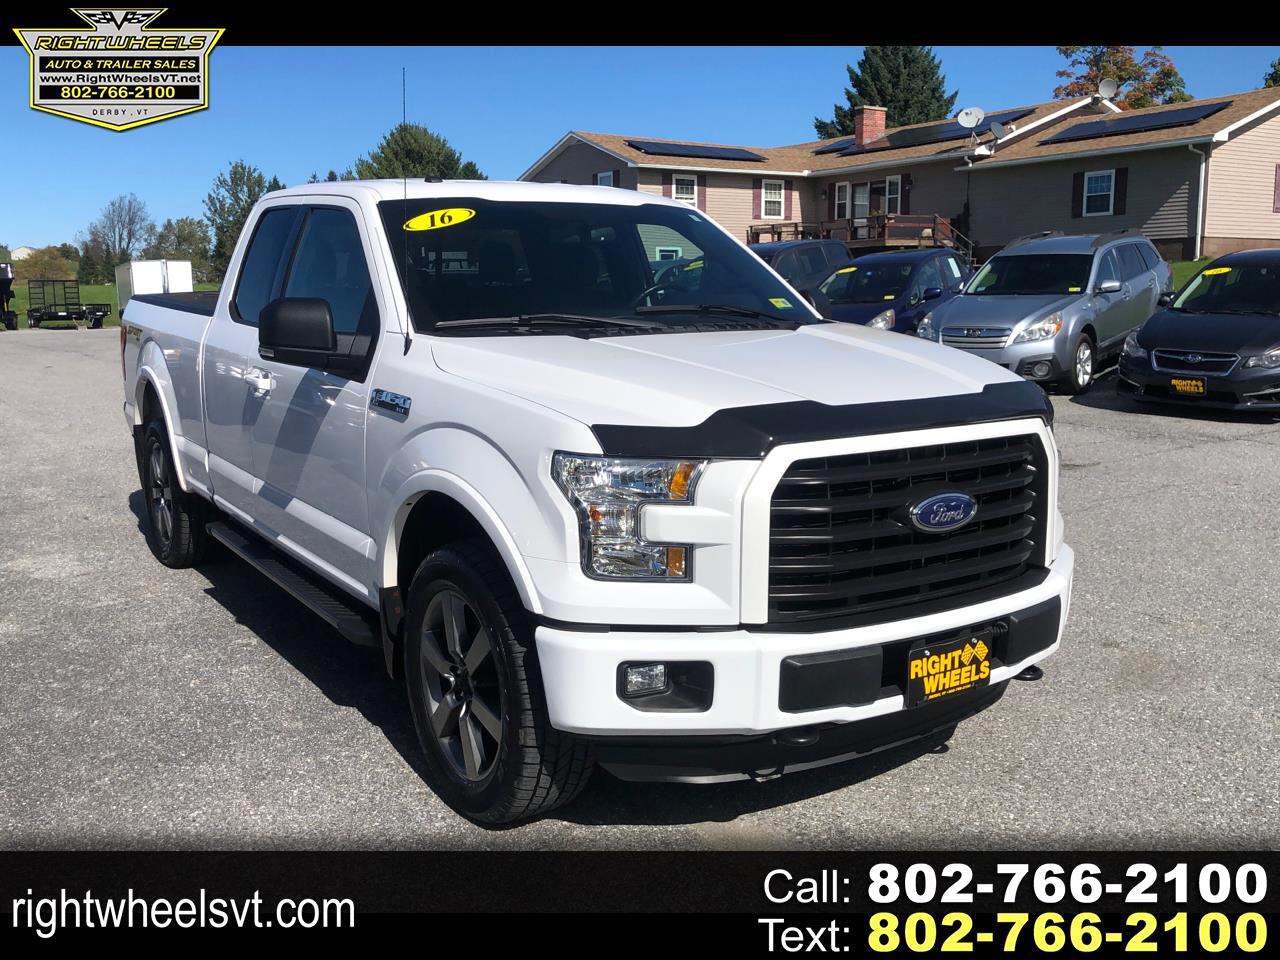 Ford F-150 XLT 6.5-ft. Bed 4WD 2016